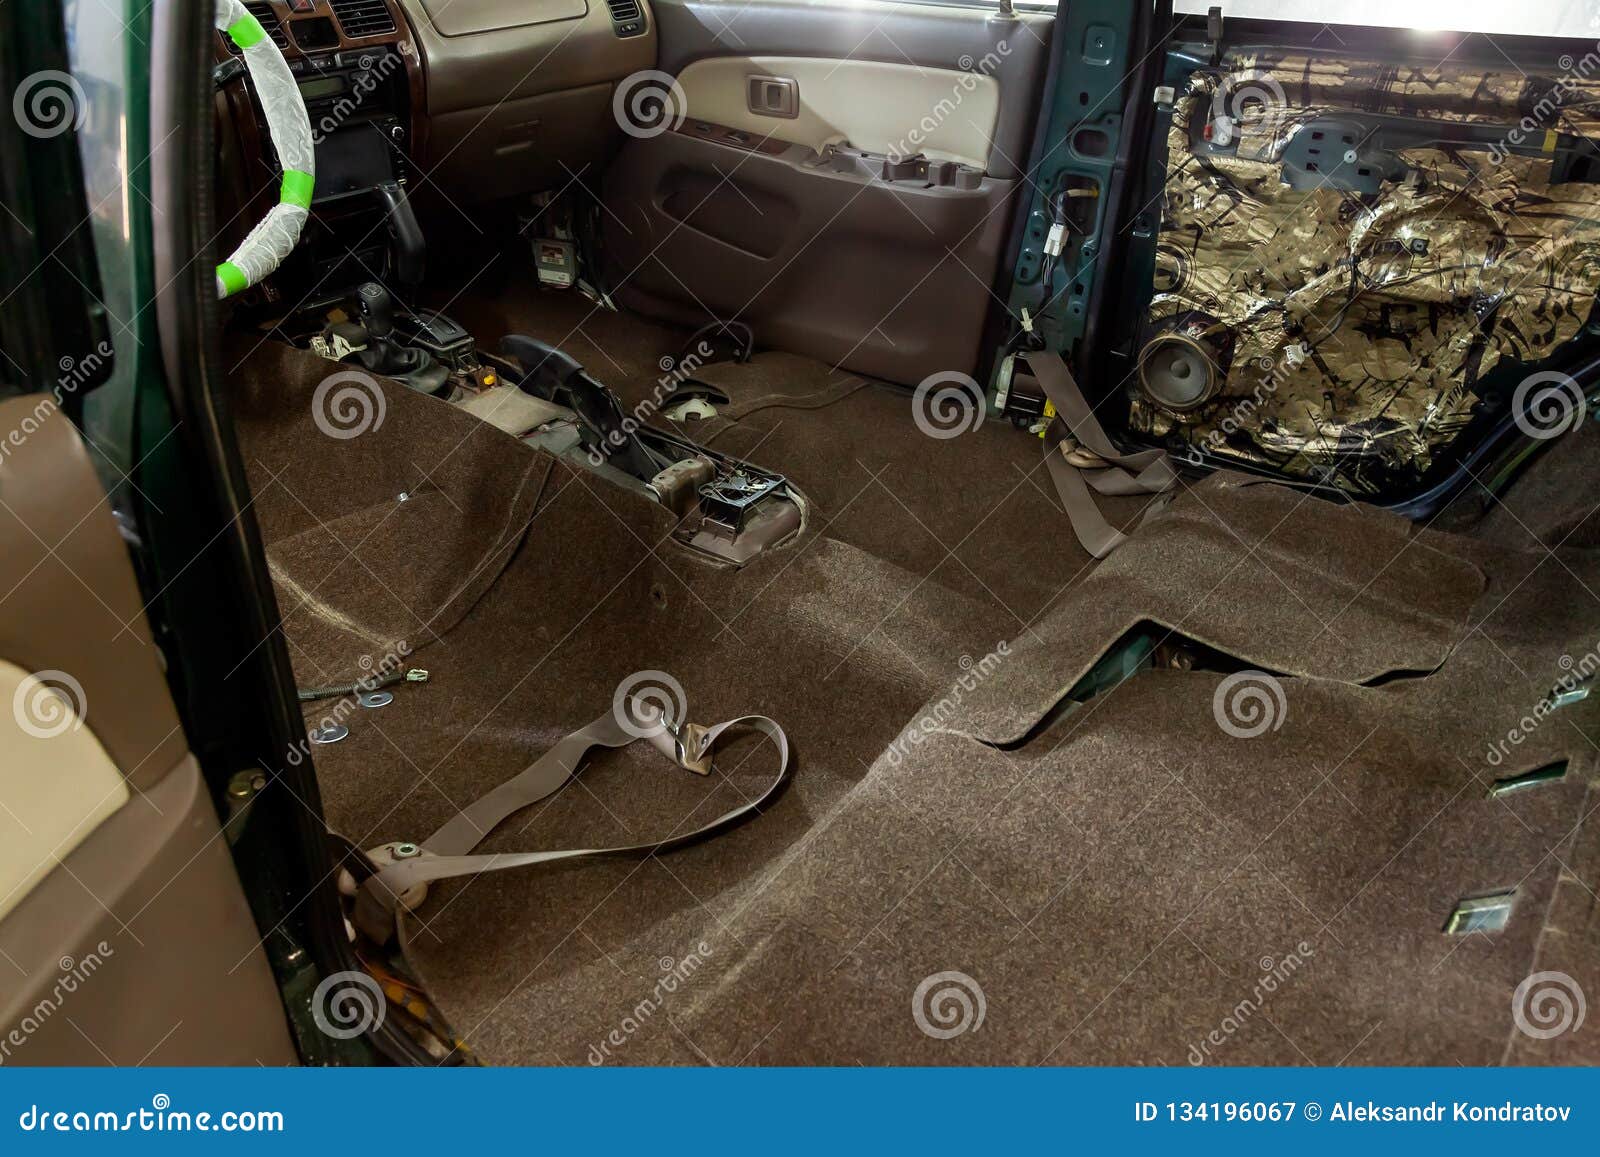 Repair Of The Car S Interior Beige And Brown Removed The